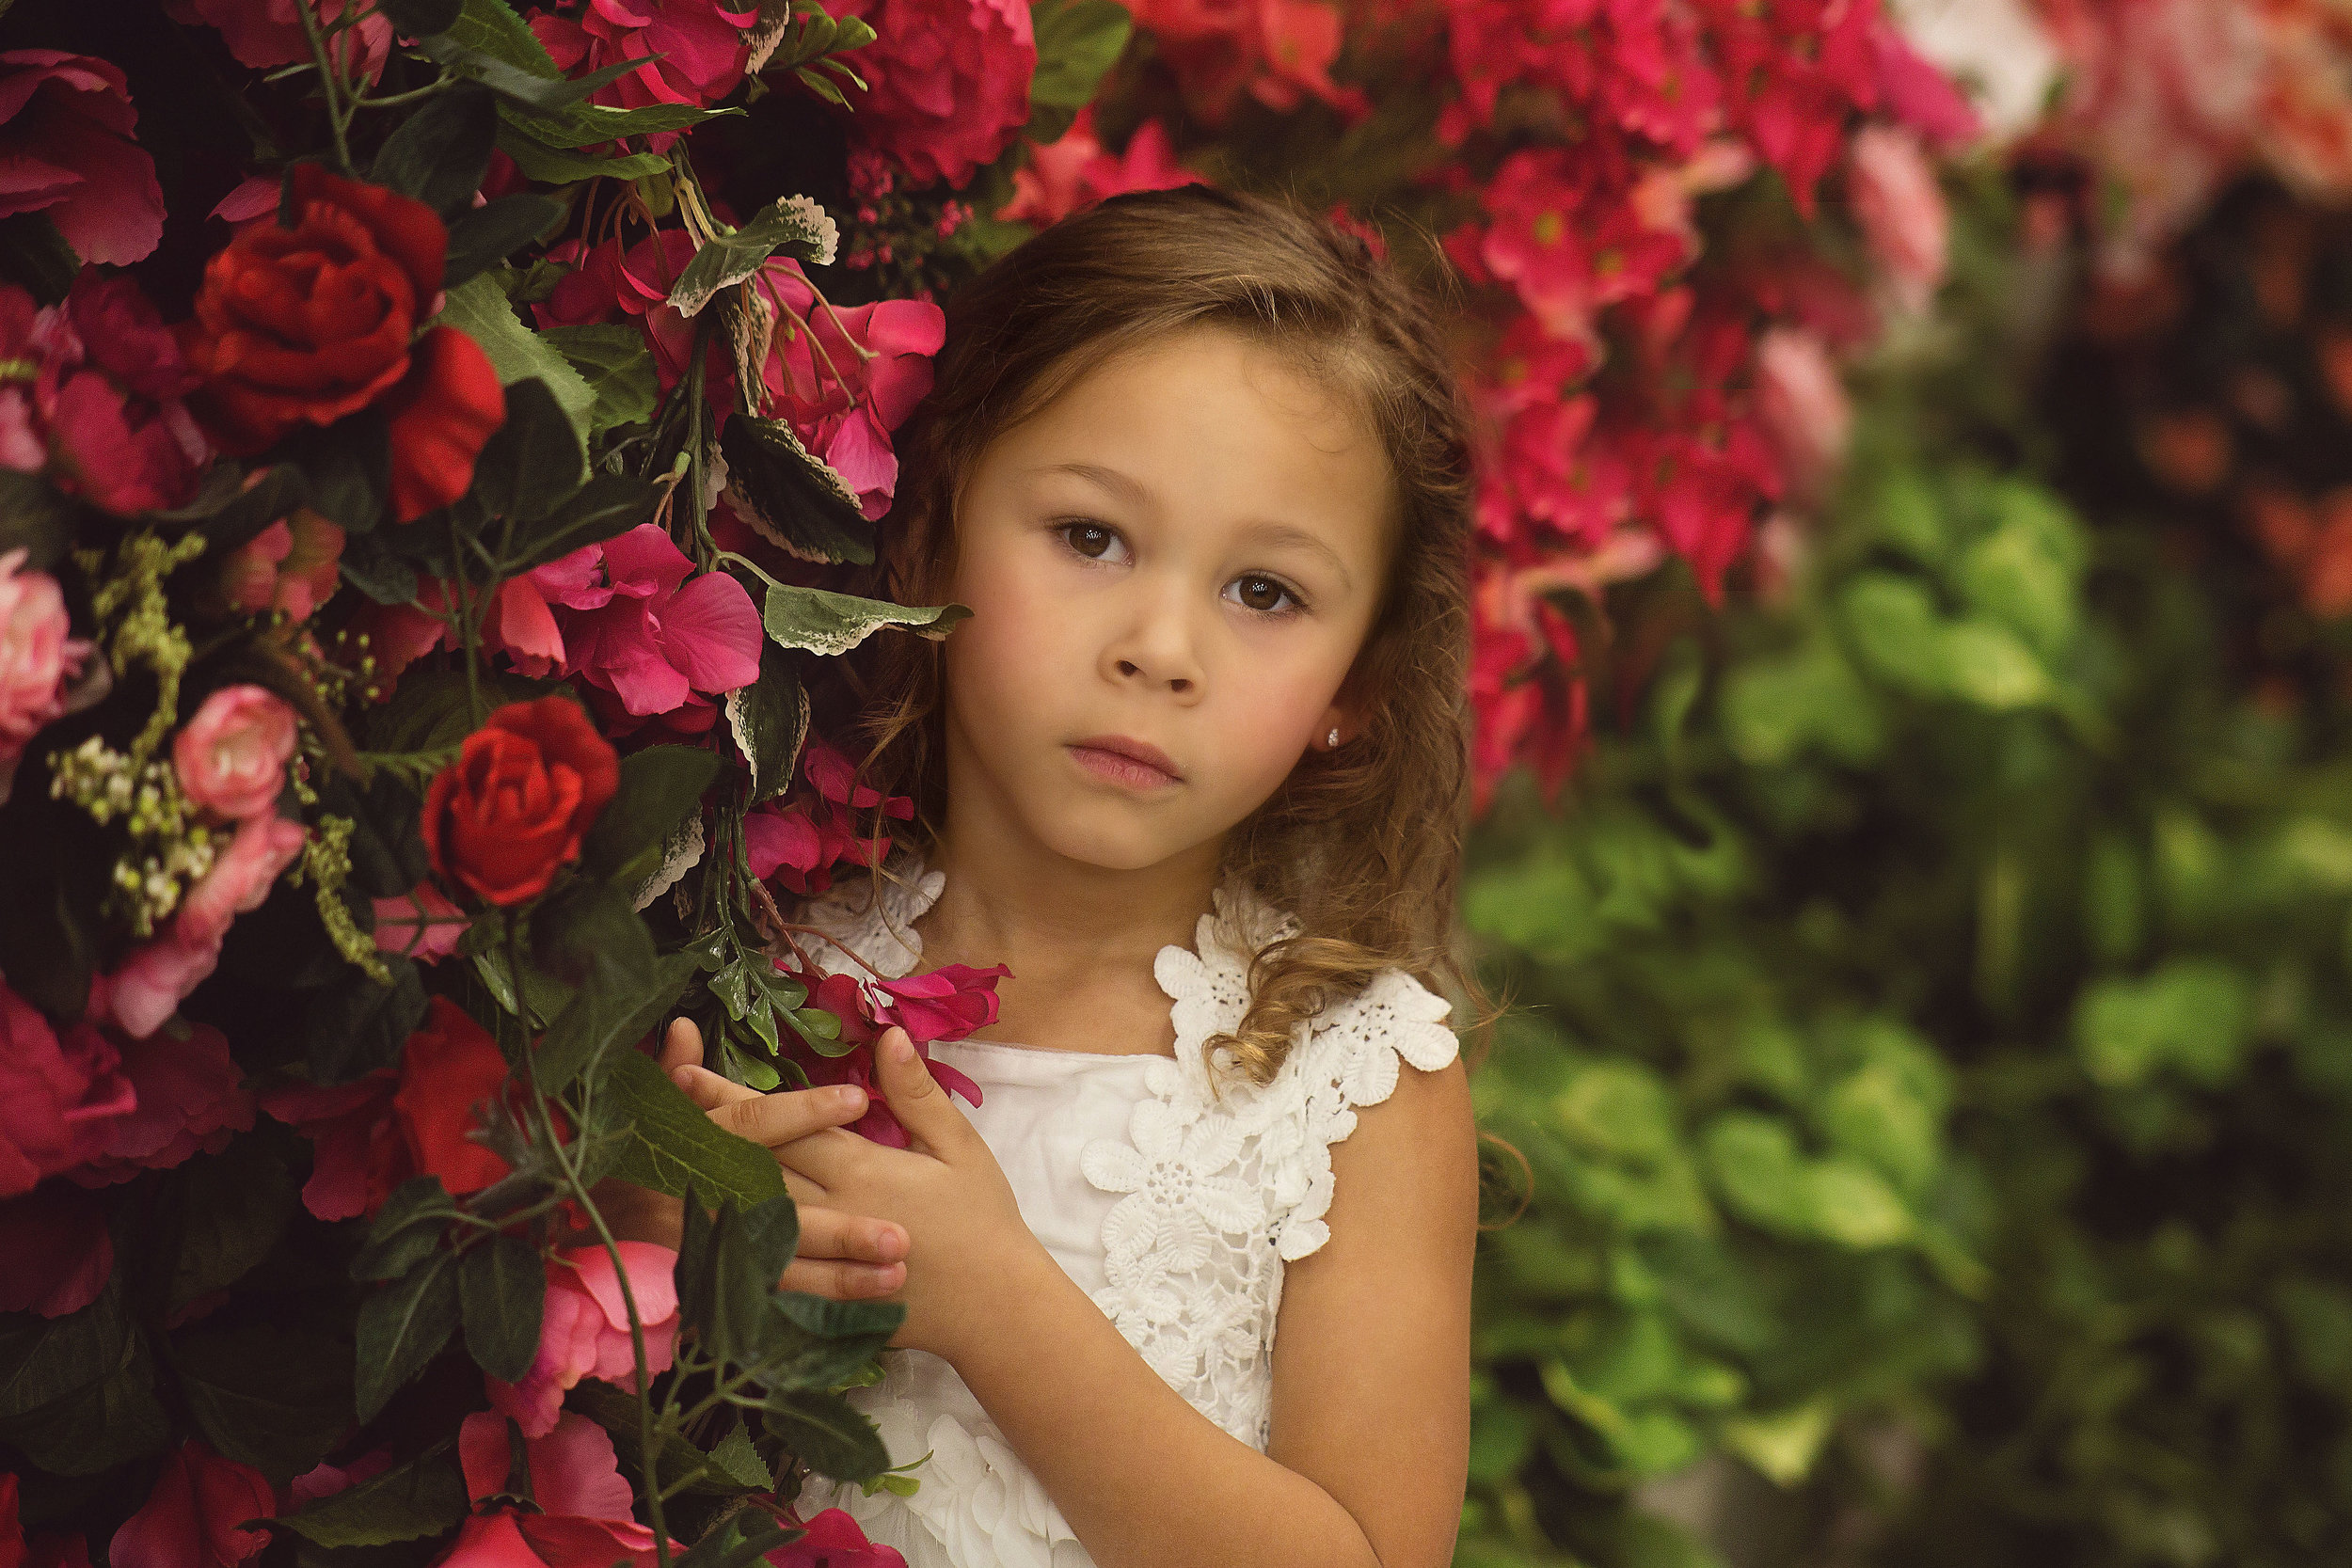 Little girl with flowers Nashville tennessee